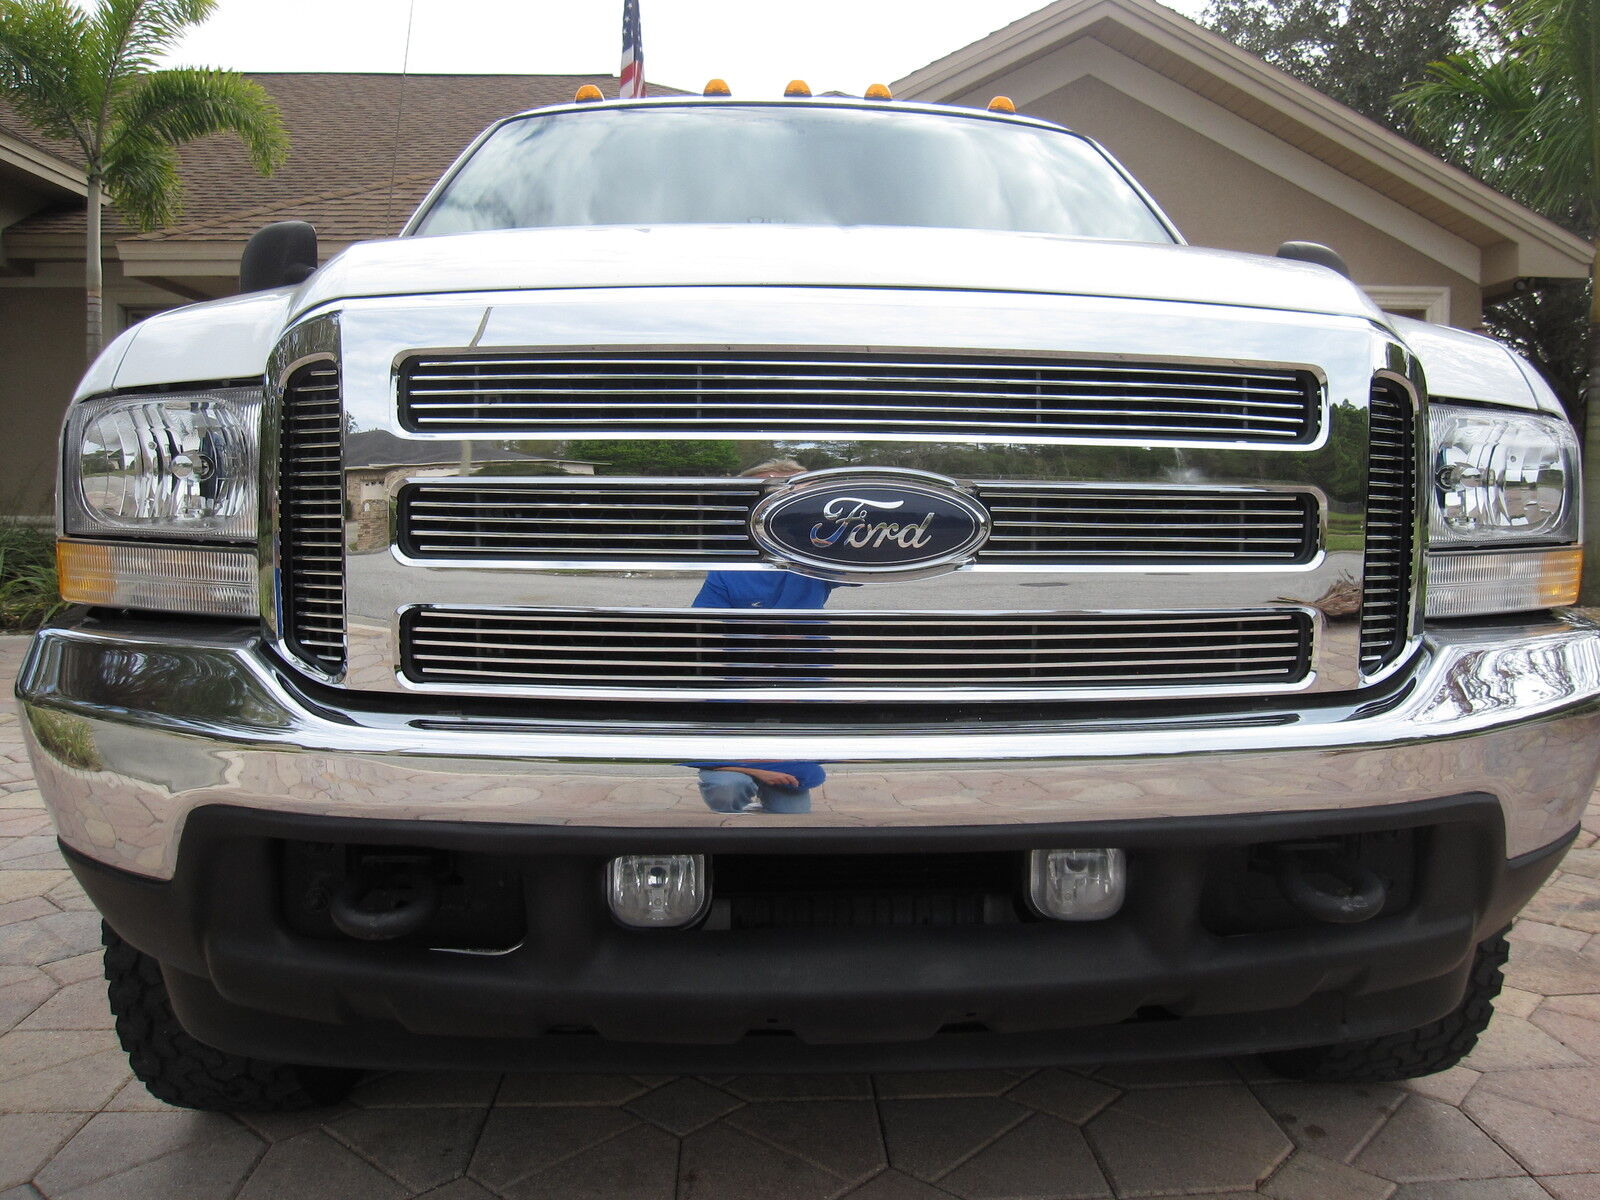 FORD CHROME GRILLE CONVERSION FITS 1999-2004 SUPER DUTY 2005 2006 2007 F250 F350